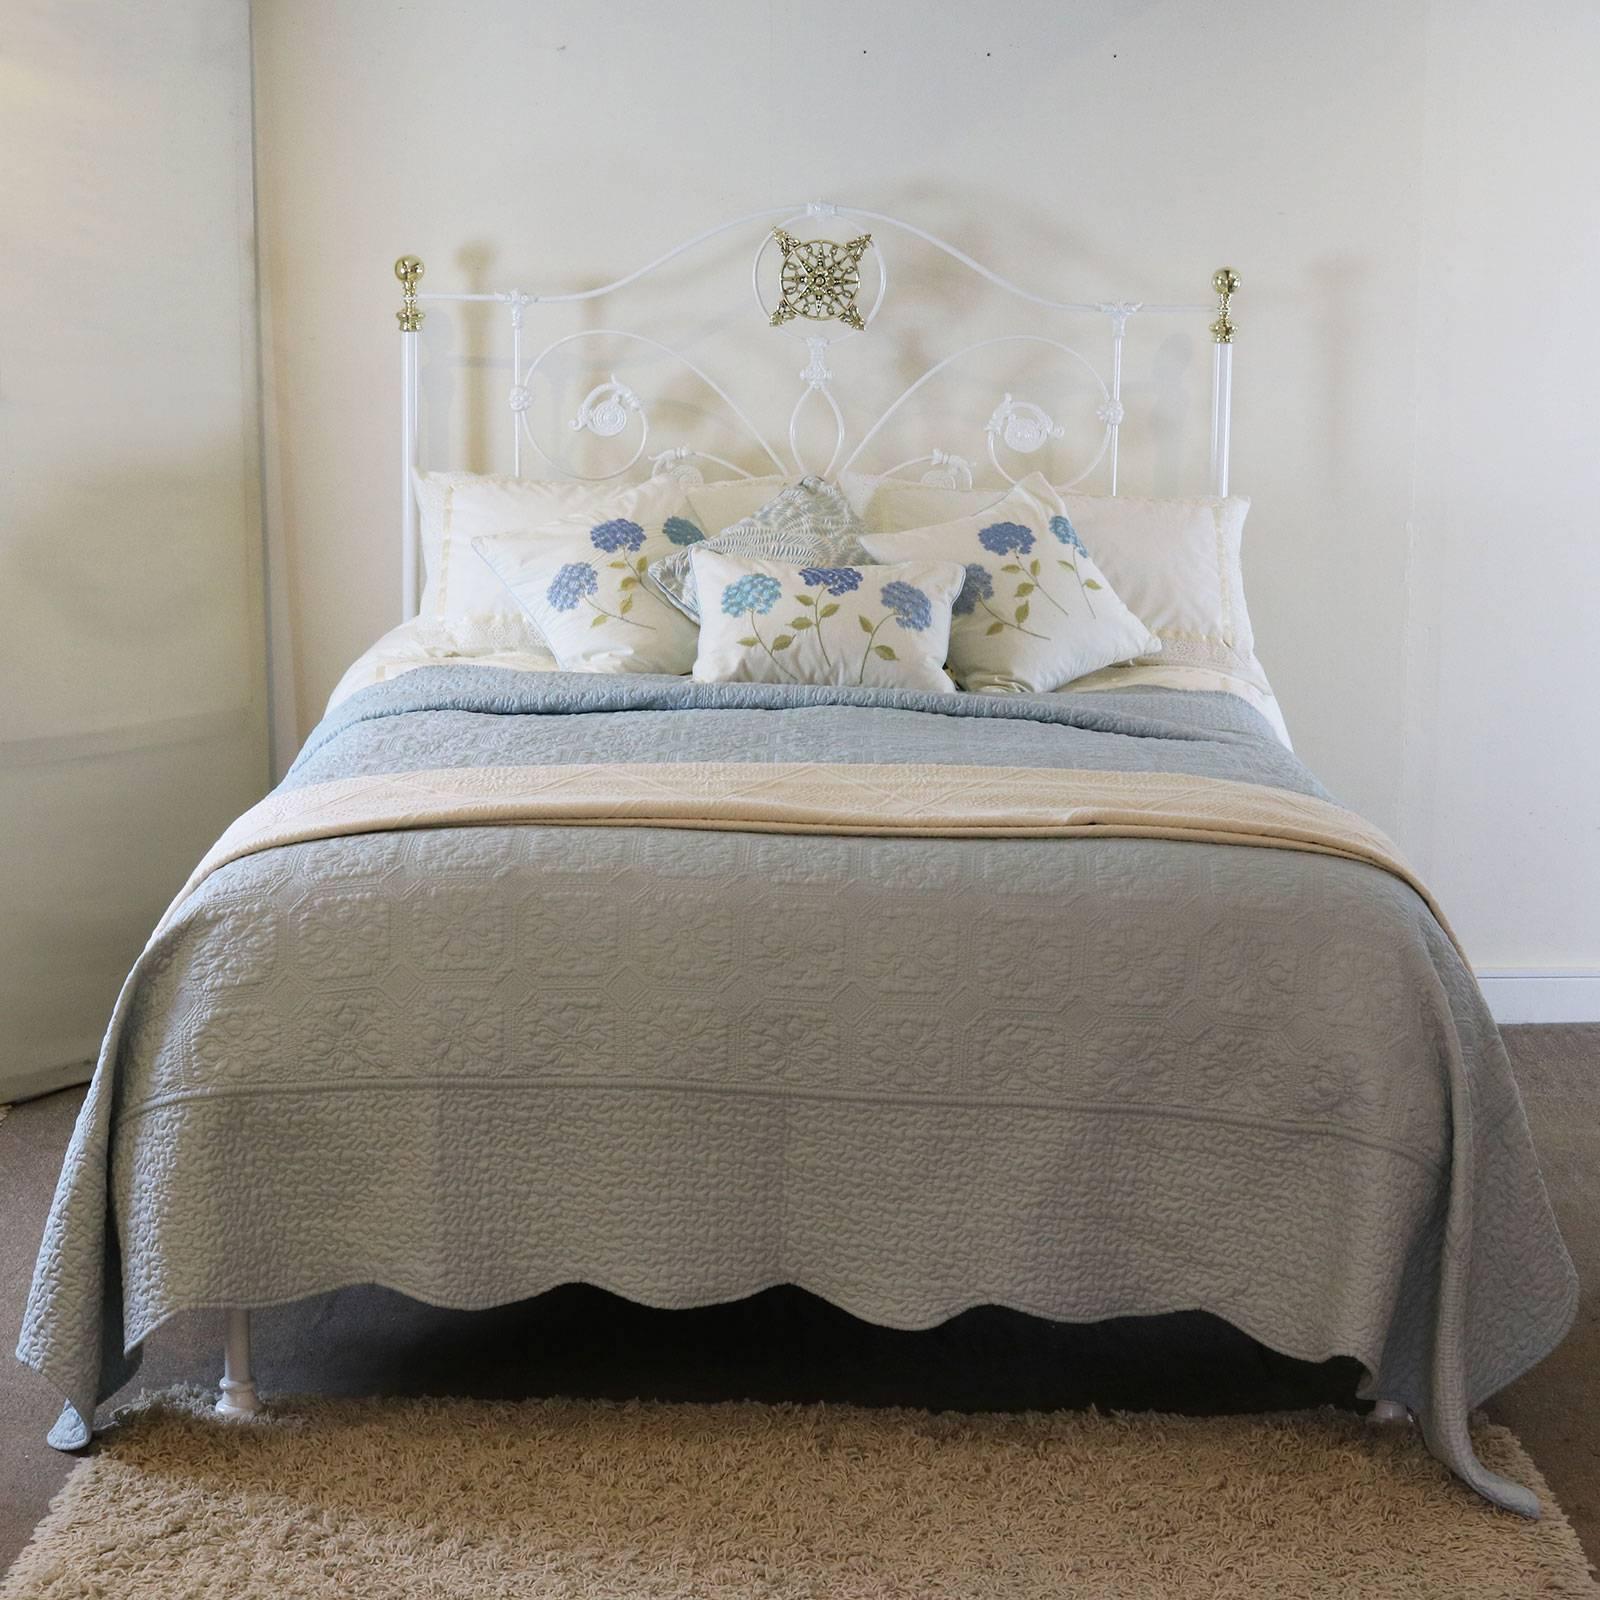 This low end platform bed has an attractive head panel finished in white with decorative castings and central brass star feature. Seventh Heaven have adapted this from an original bed, circa 1880.

This bed accepts a British king-size or American